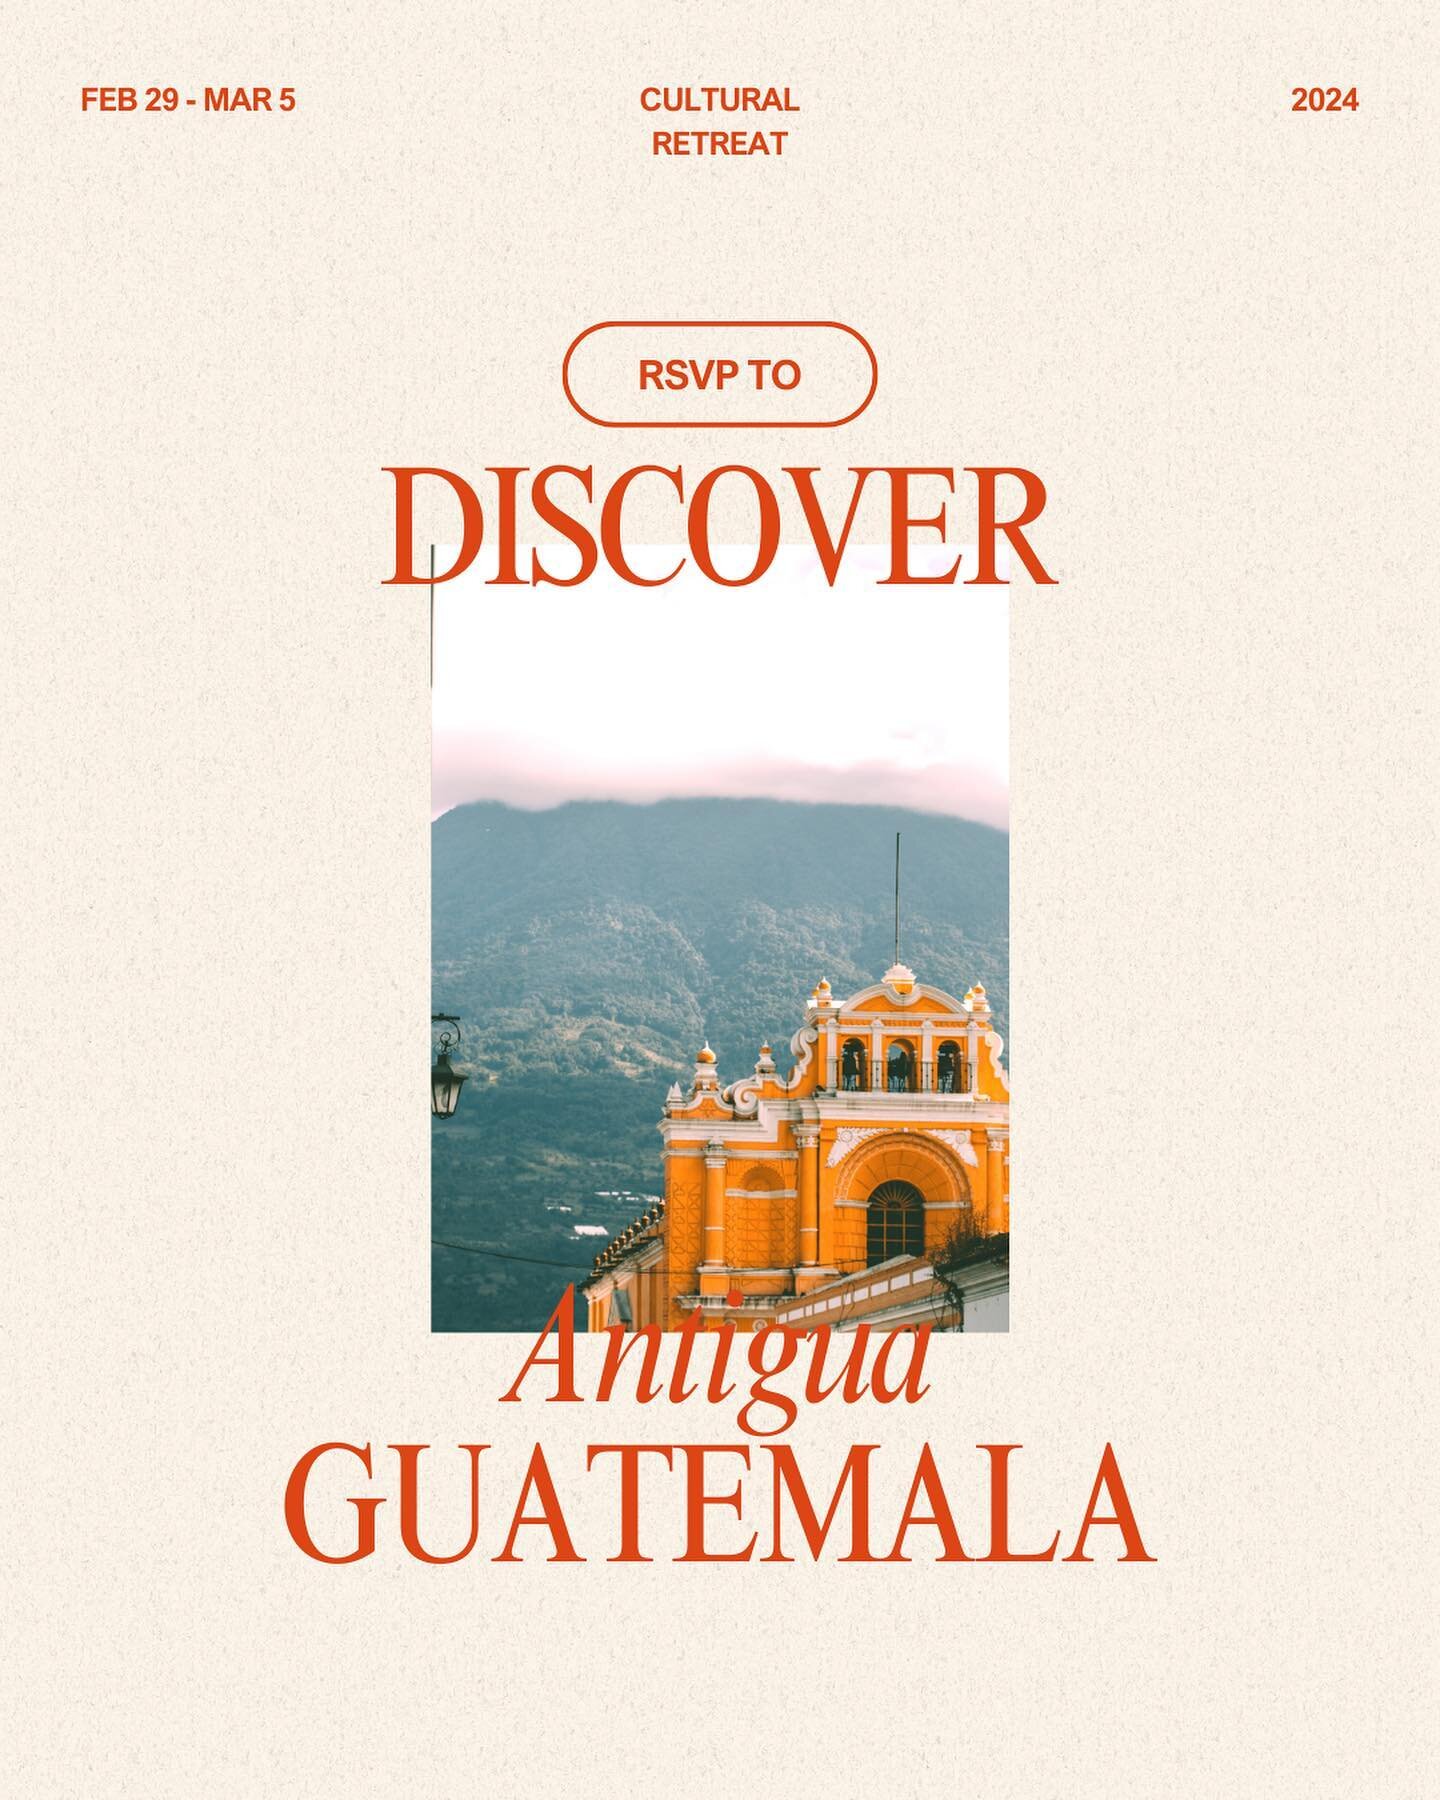 Come with me to Guatemala! Feb 29-March 5, 2024 🇬🇹🌞

Escape those winter blues next Feb and head south to Antigua, Guatemala ✈️ In partnership with&nbsp;@tourherotravel&nbsp;I&rsquo;ve created a 6 day, 5 night retreat packed with exciting experien